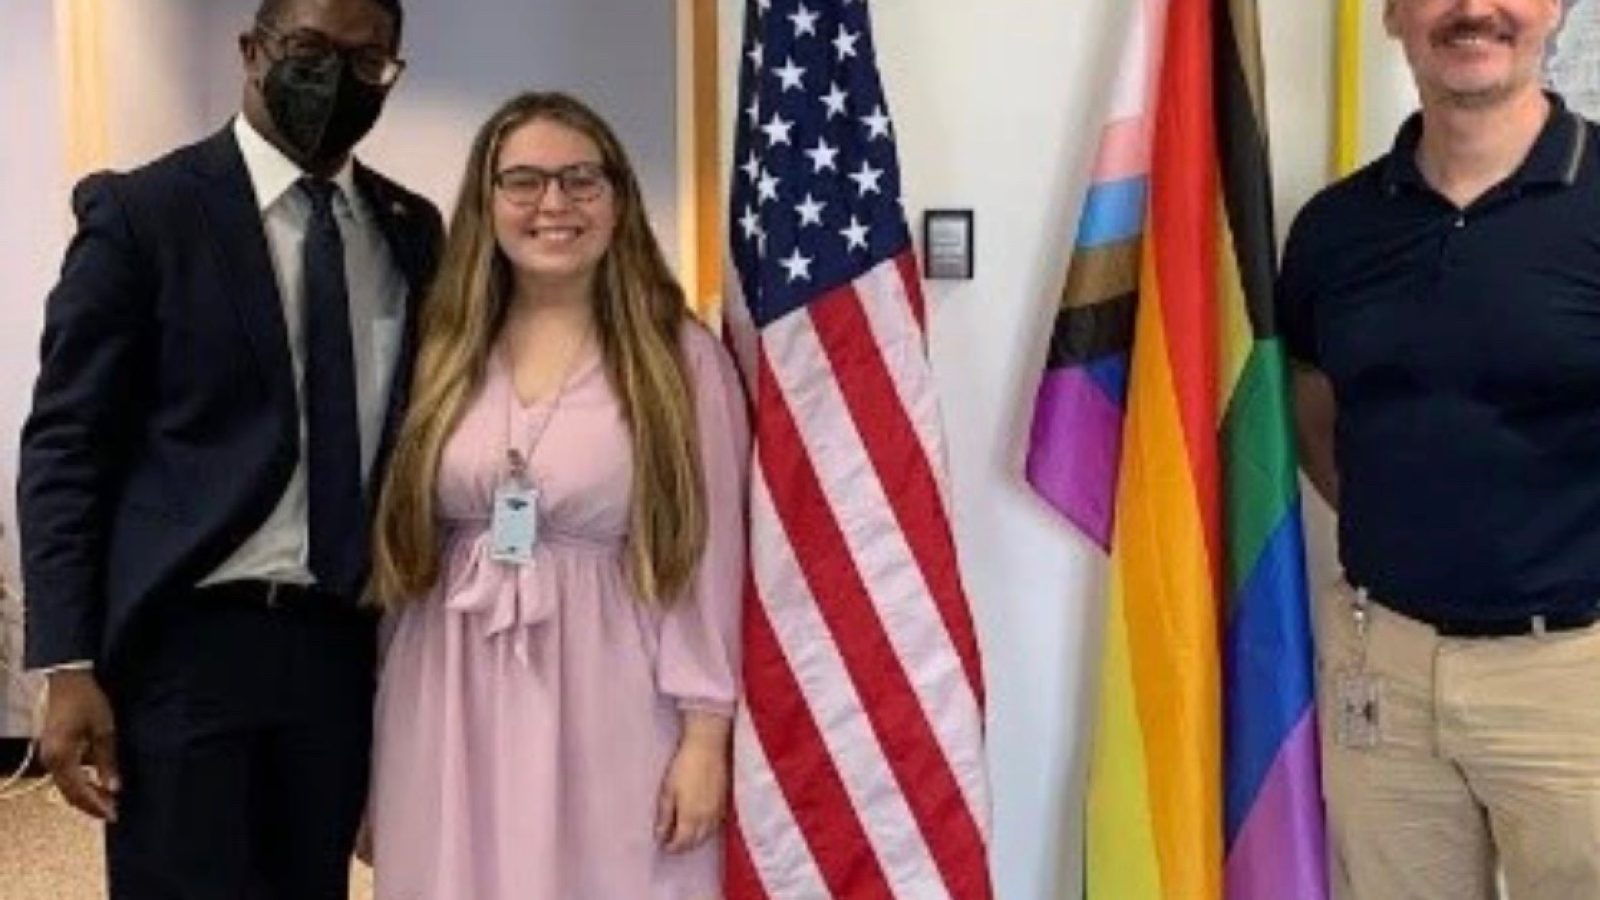 Gwyneth Murphy takes a photo with two colleagues to commemorate hanging up the LGBTQI+ Progress Flag in the State Department office